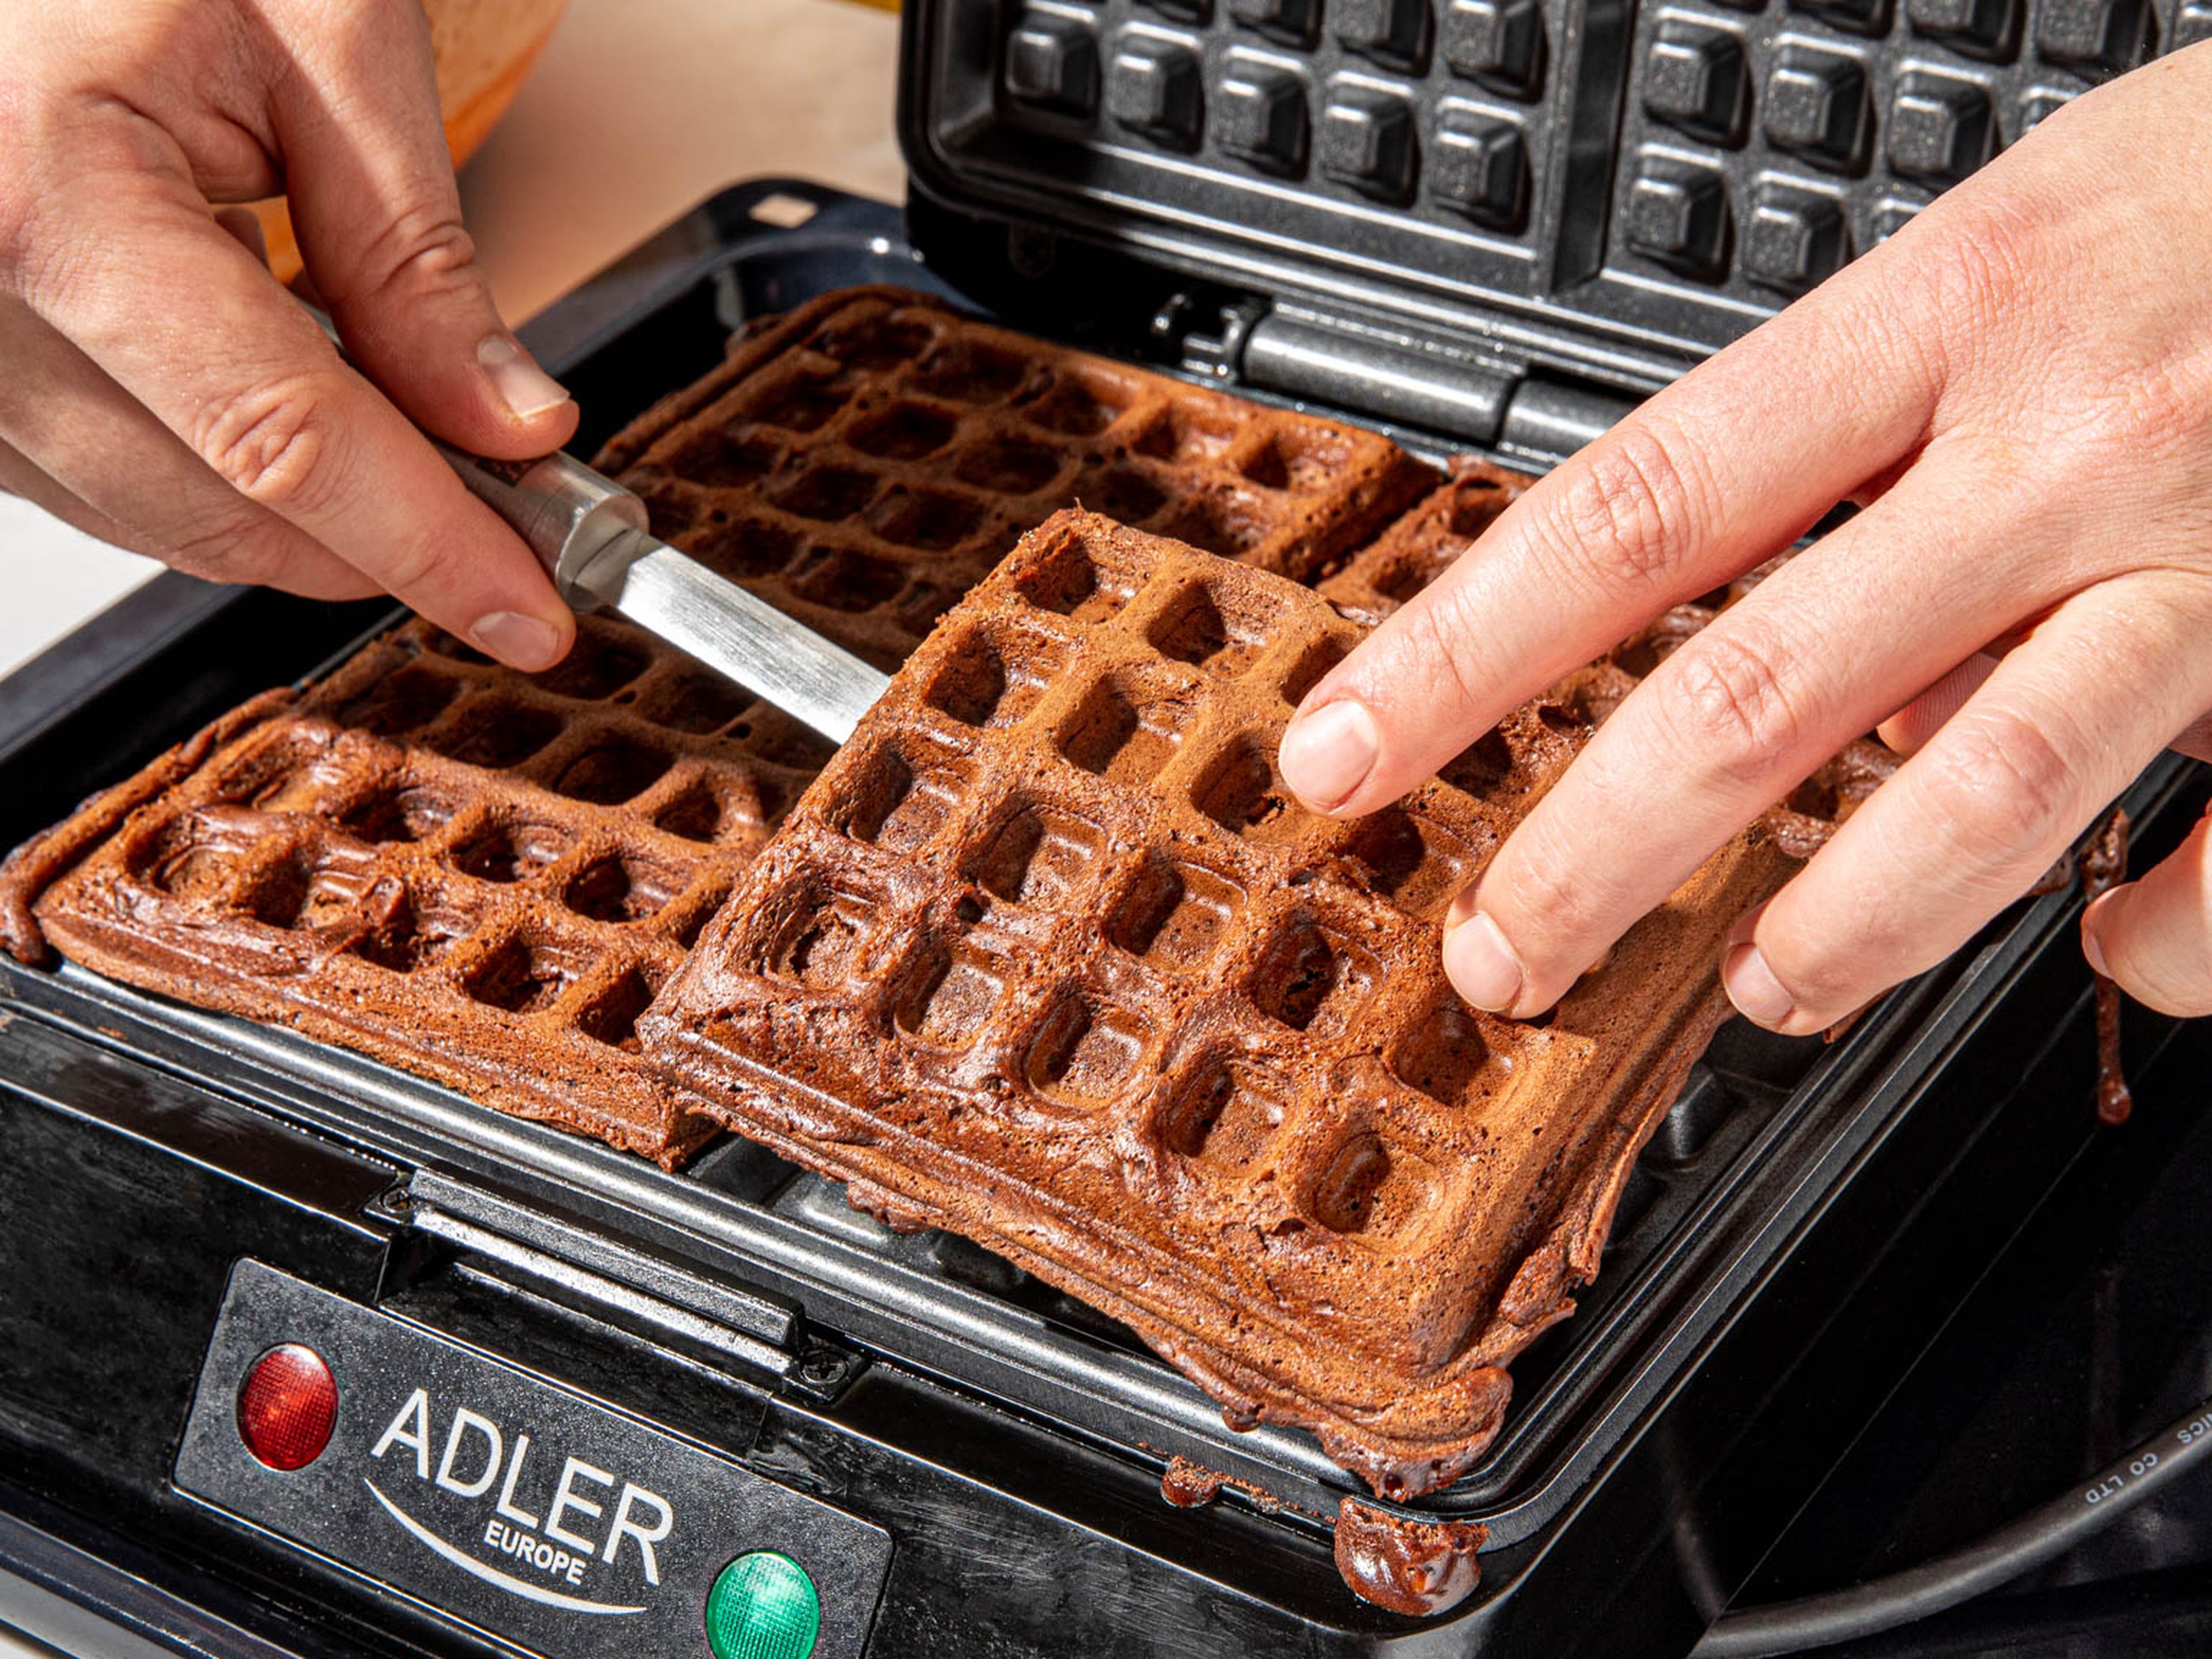 Brush the waffle iron with vegetable oil. Add batter to the heated waffle iron in batches and transfer cooked waffles to a cooling rack. Repeat until all batter is used up.